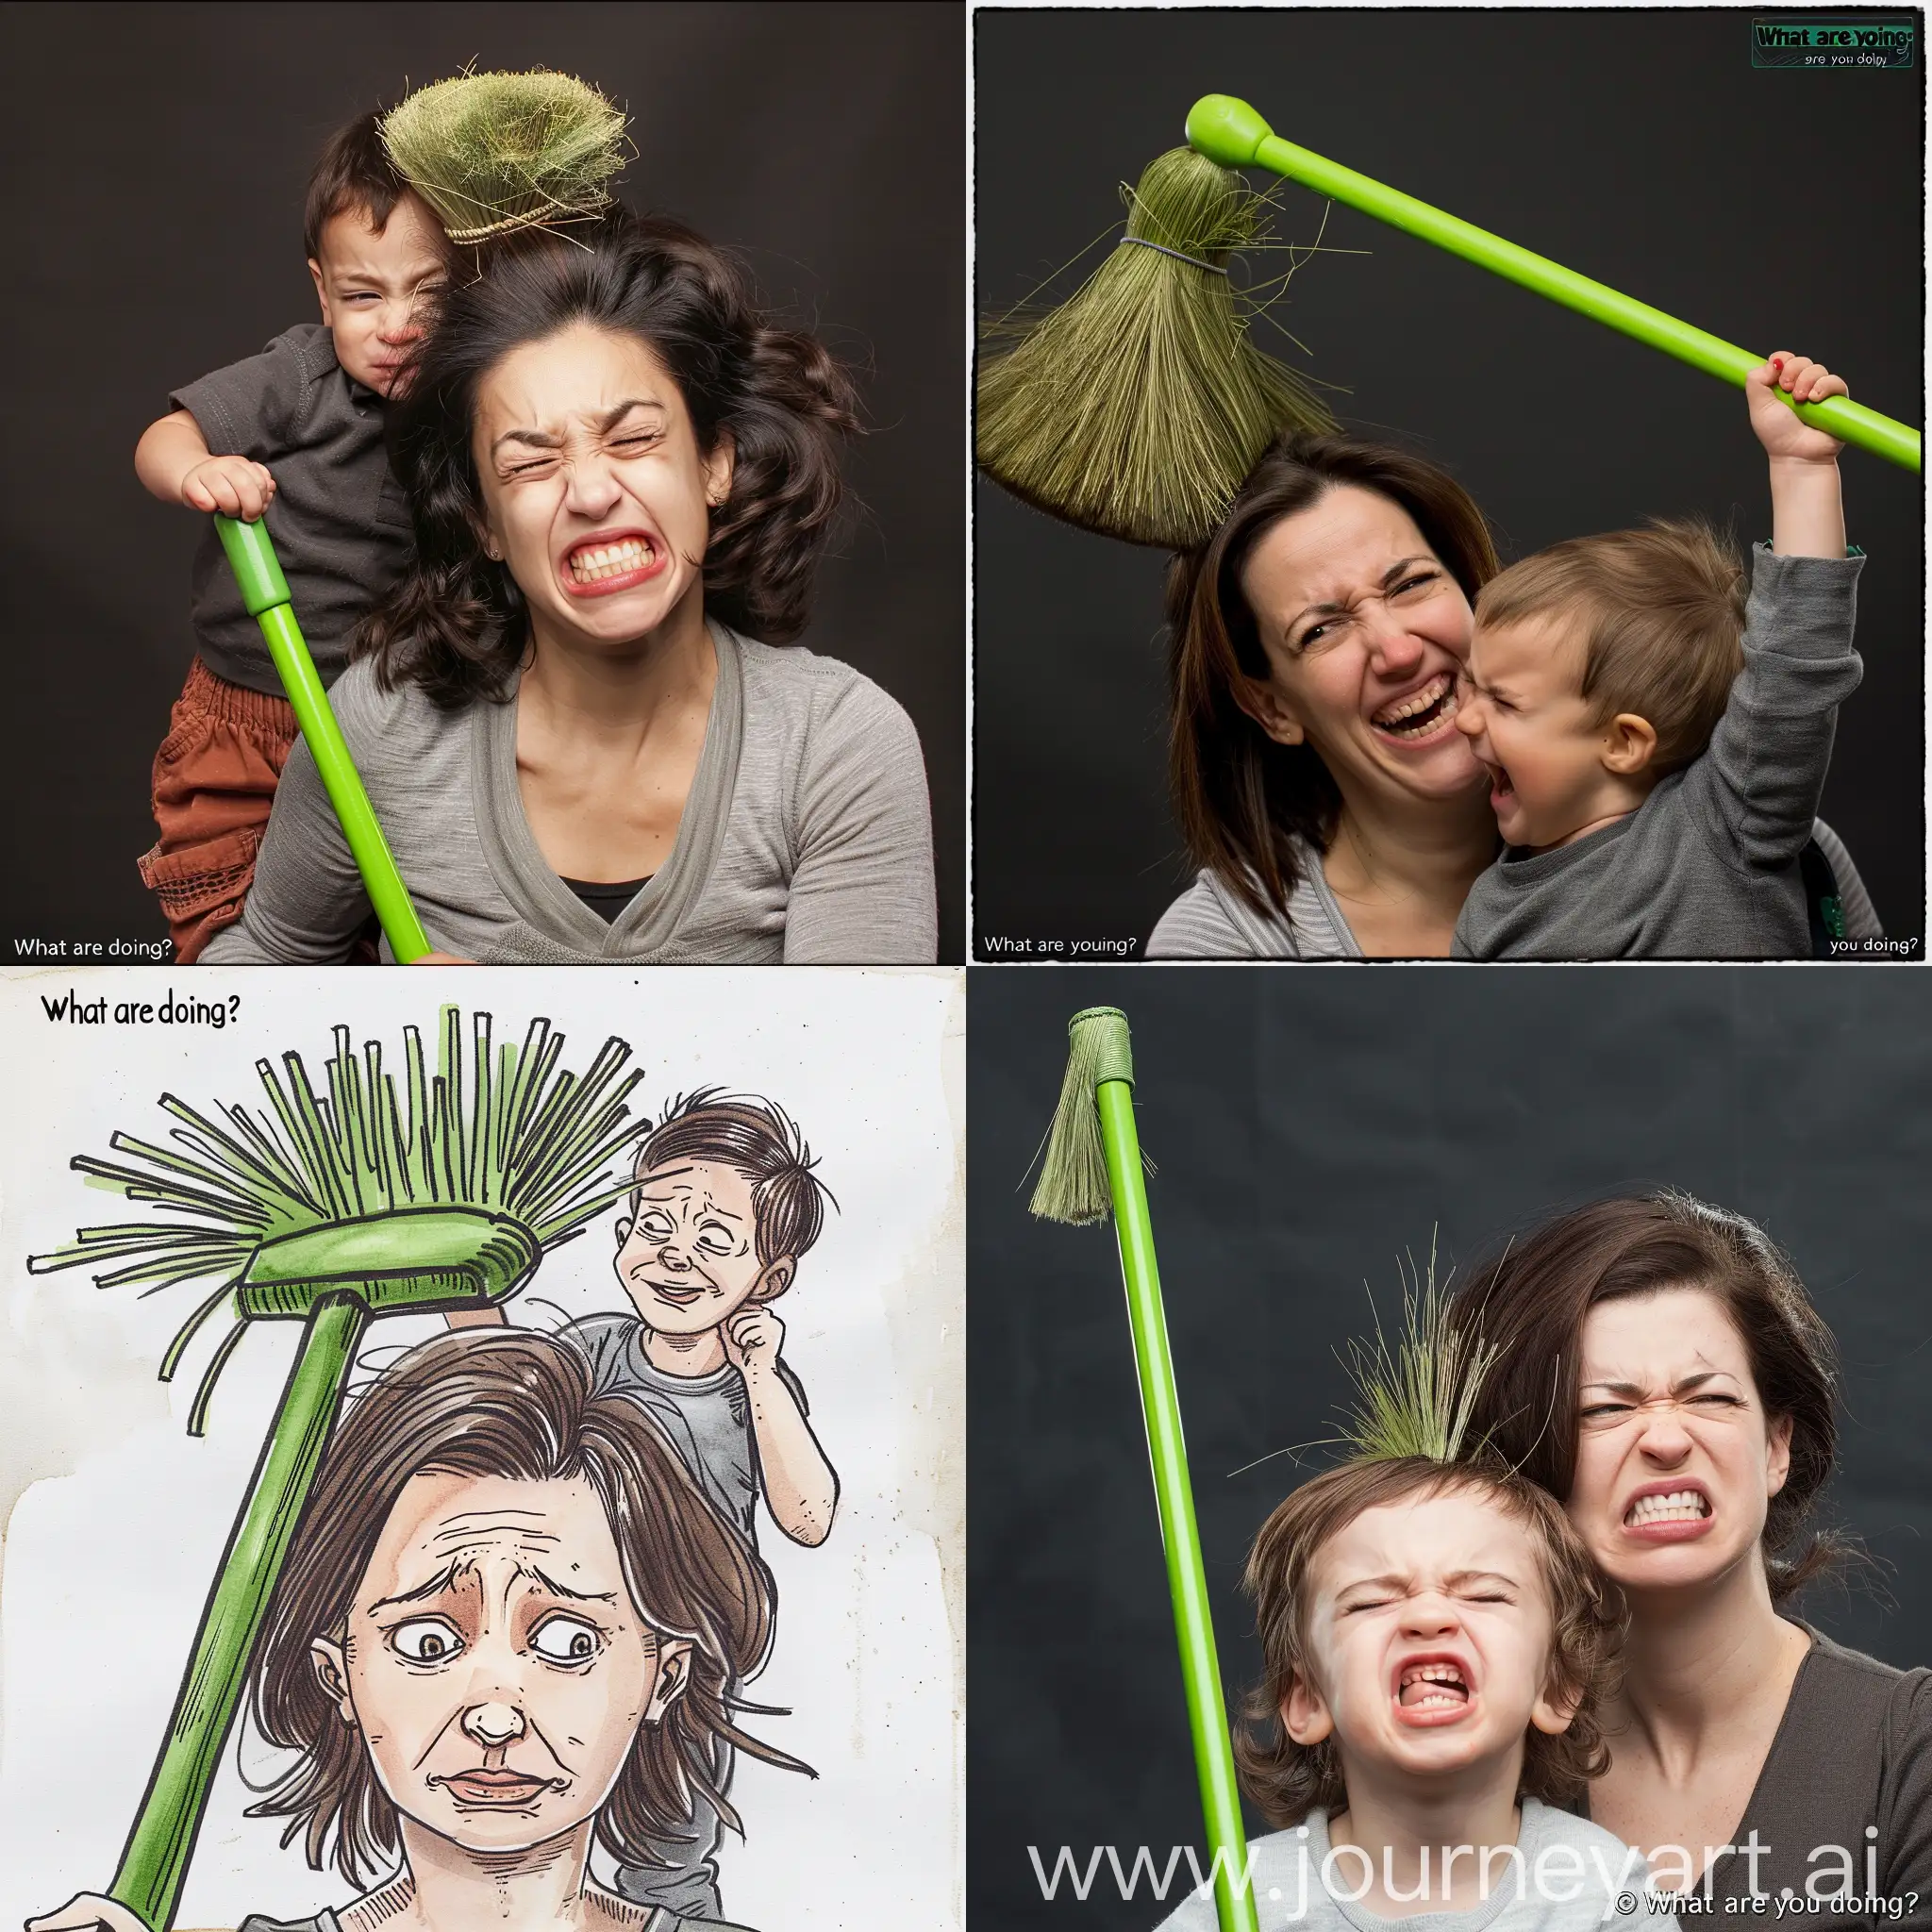 a toddler boy, green broom in hand, sweeps his mother’s head with playful abandon. The bristles tickle her scalp, and she flinches, her anger rising. “What are you doing?” she scolds, her voice a mix of exasperation and affection. The little one grins, unaware of the trouble he’s stirred.